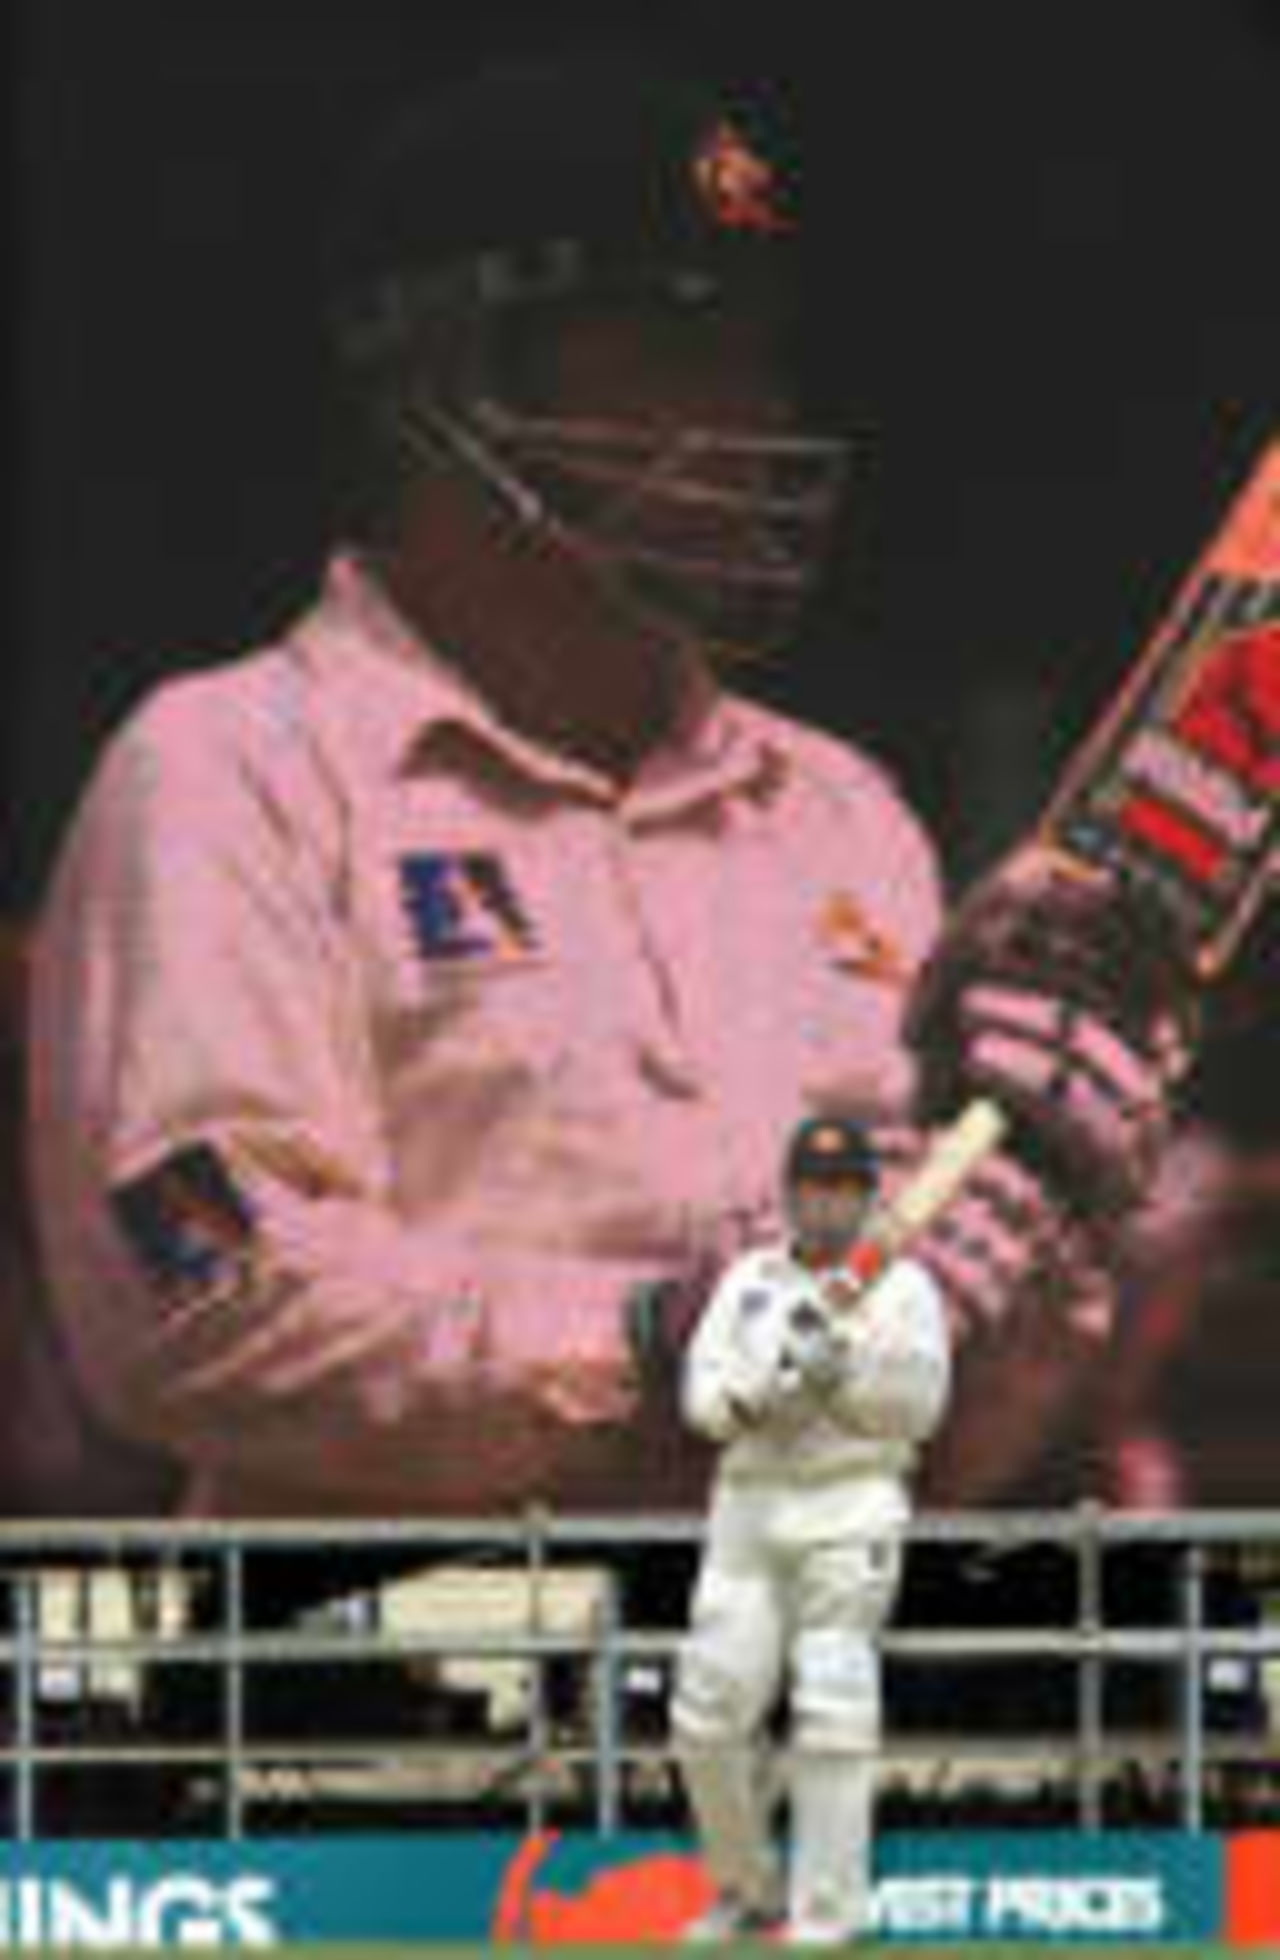 Mark Taylor in his 100th test match is dwarfed by his own image on a large video screen  <BR>Day 1, The Ashes, 1998/99, 1st Test  Australia v England  Brisbane Cricket Ground, Woolloongabba, Brisbane  20 November 1998